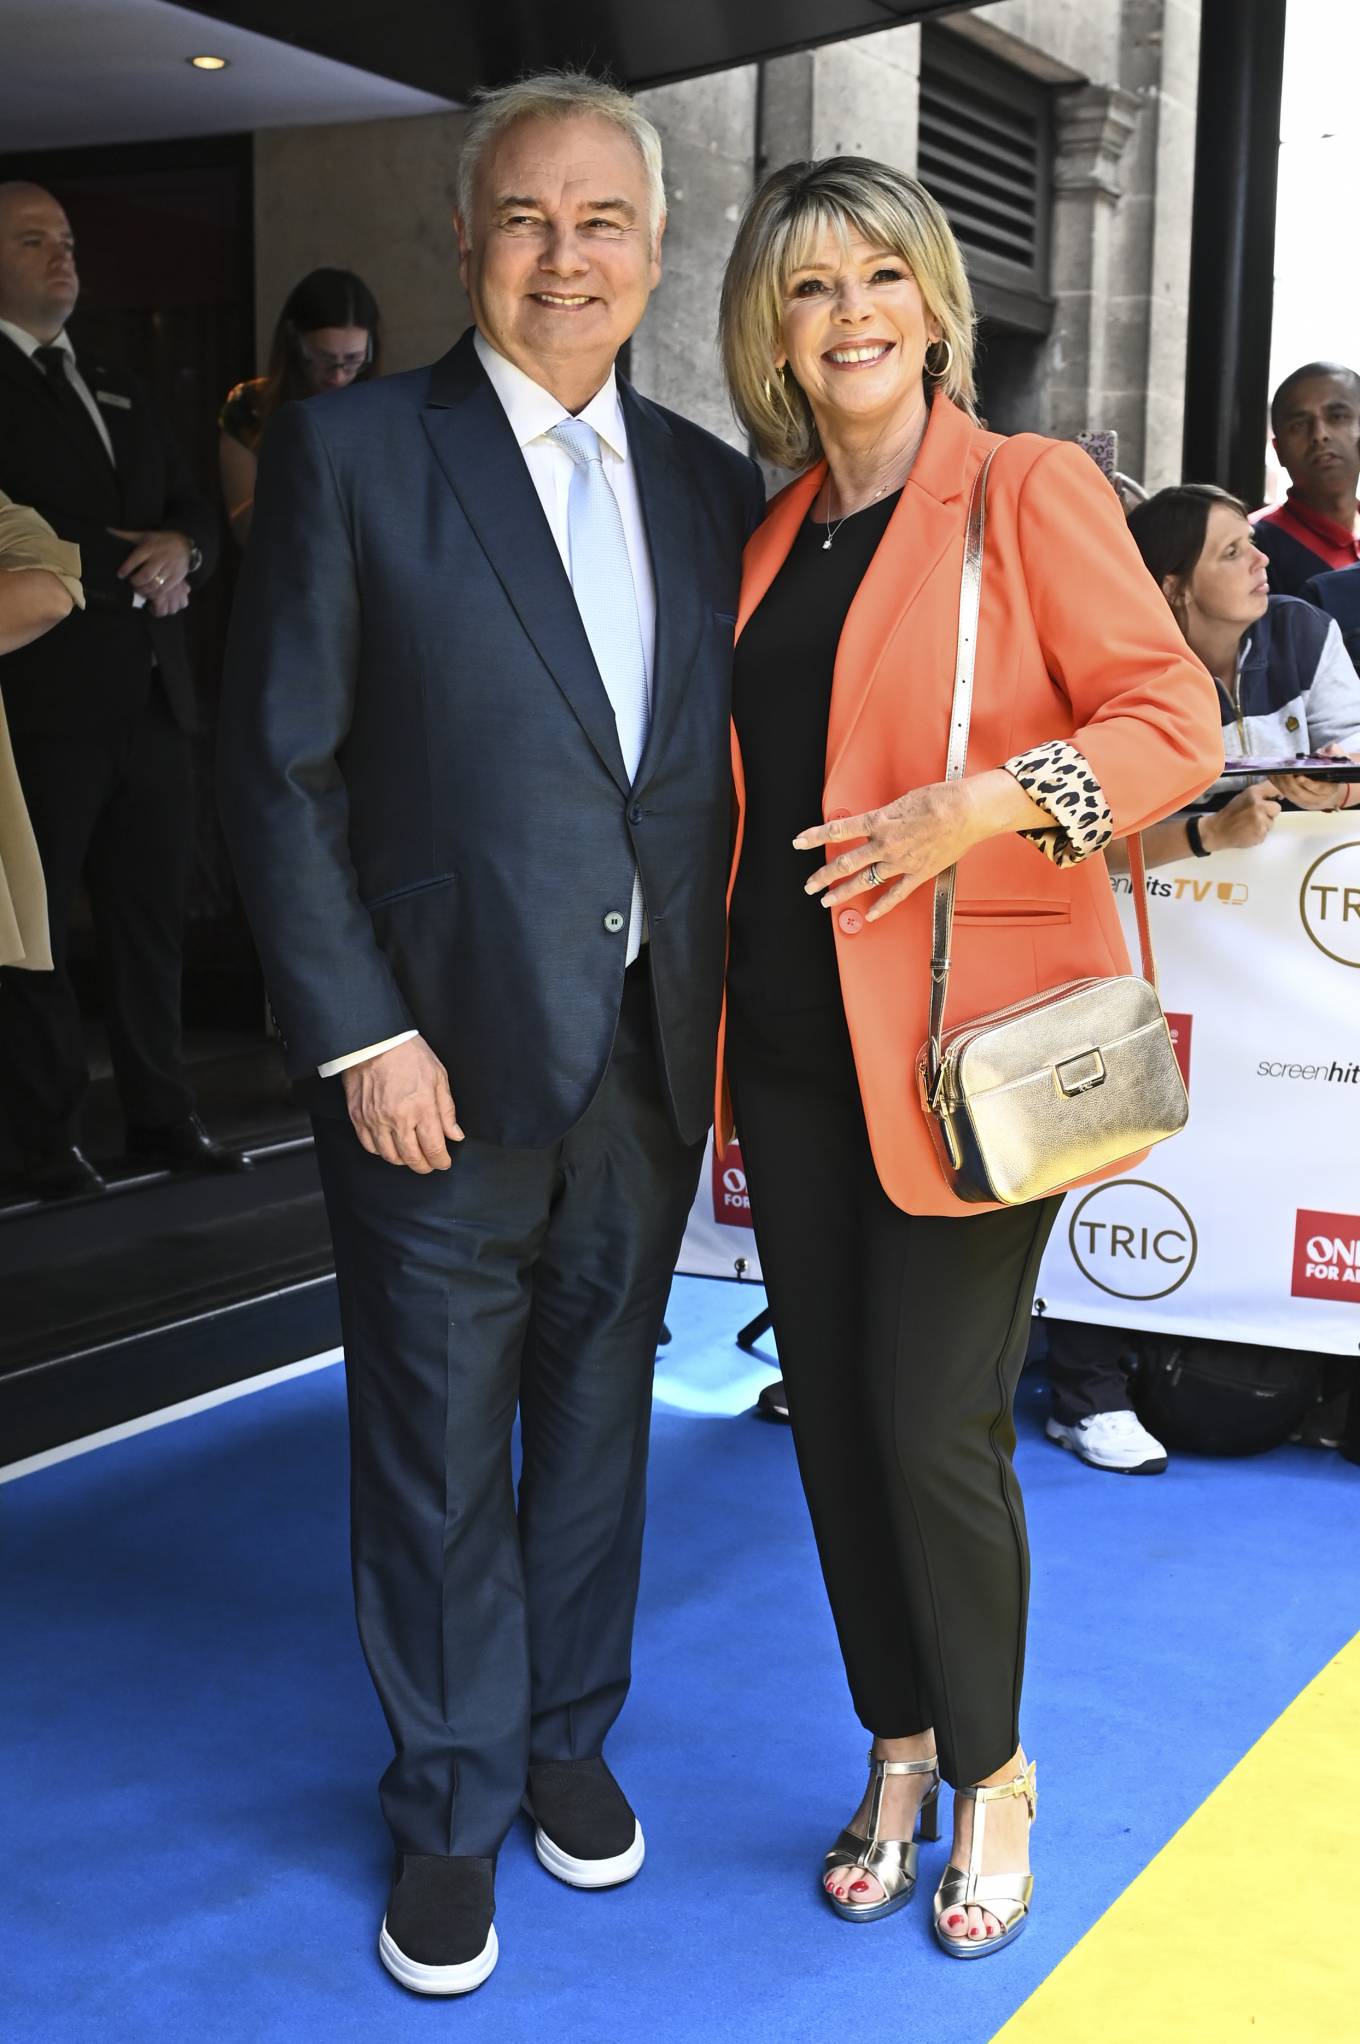 Ruth Langsford - Seen the TRIC Awards 2022 at Park Lane in London